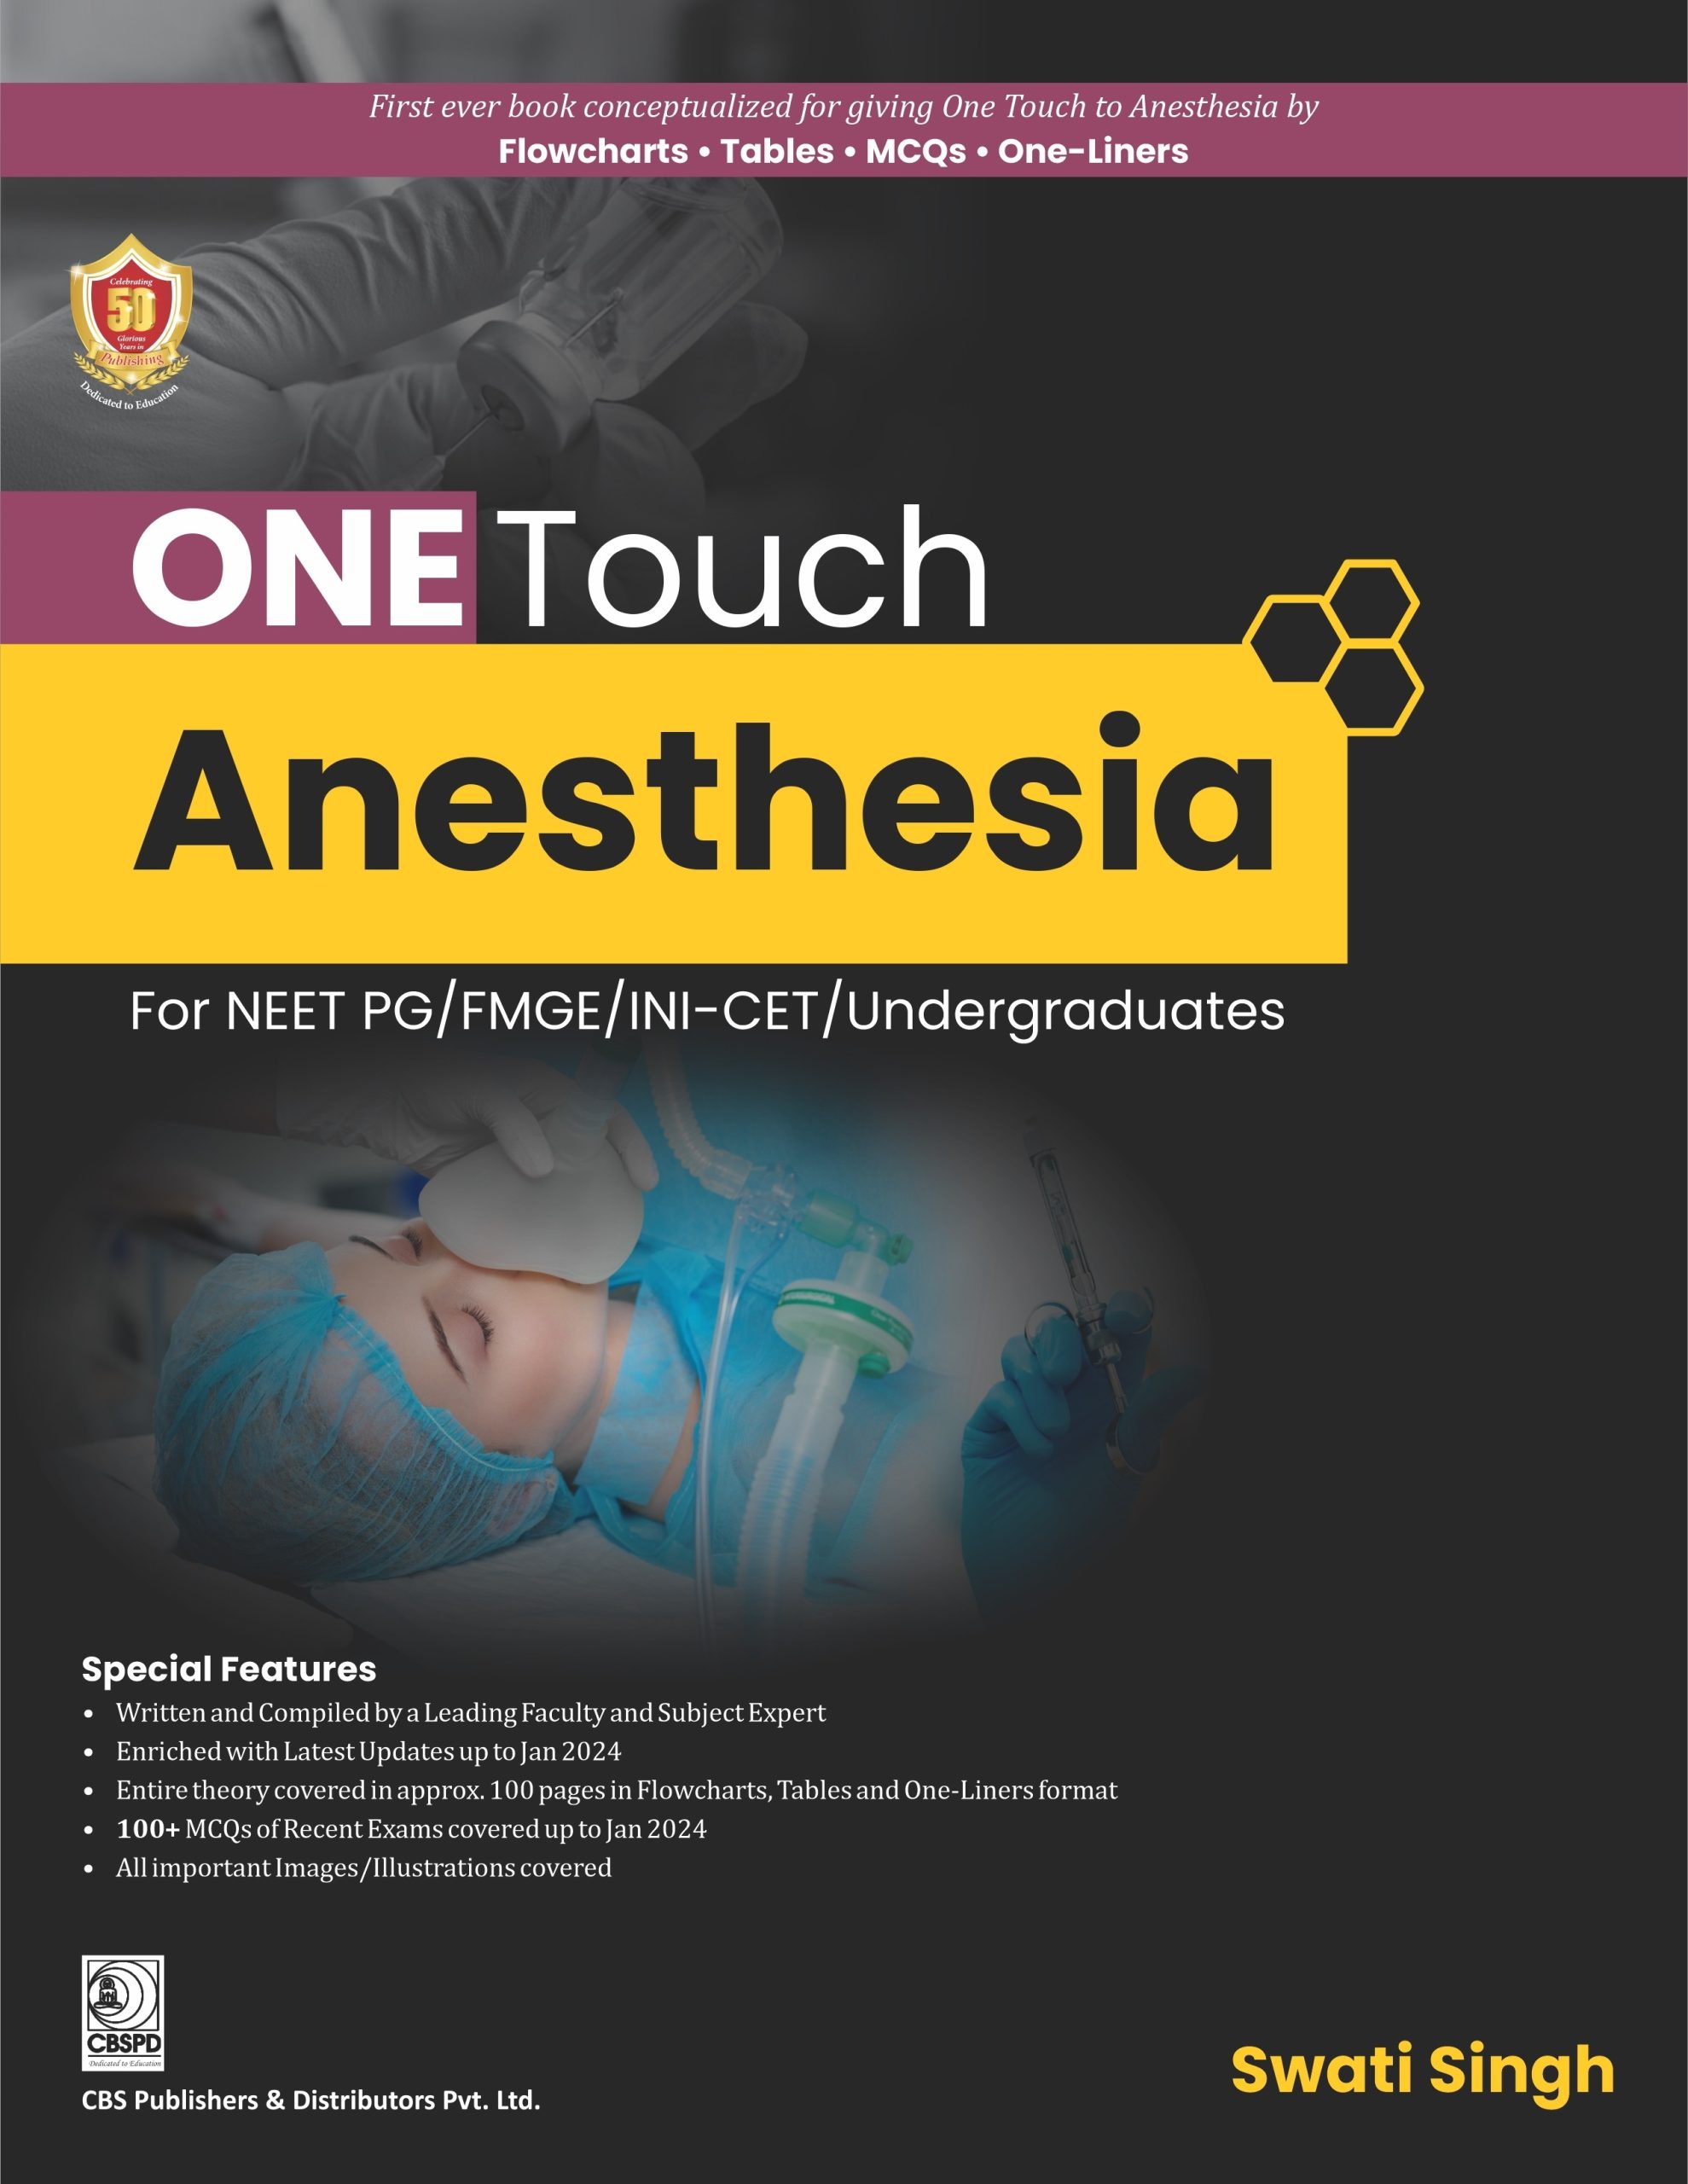 ONE TOUCH Anesthesia For NEET/NEXT/FMGE/INI-CET